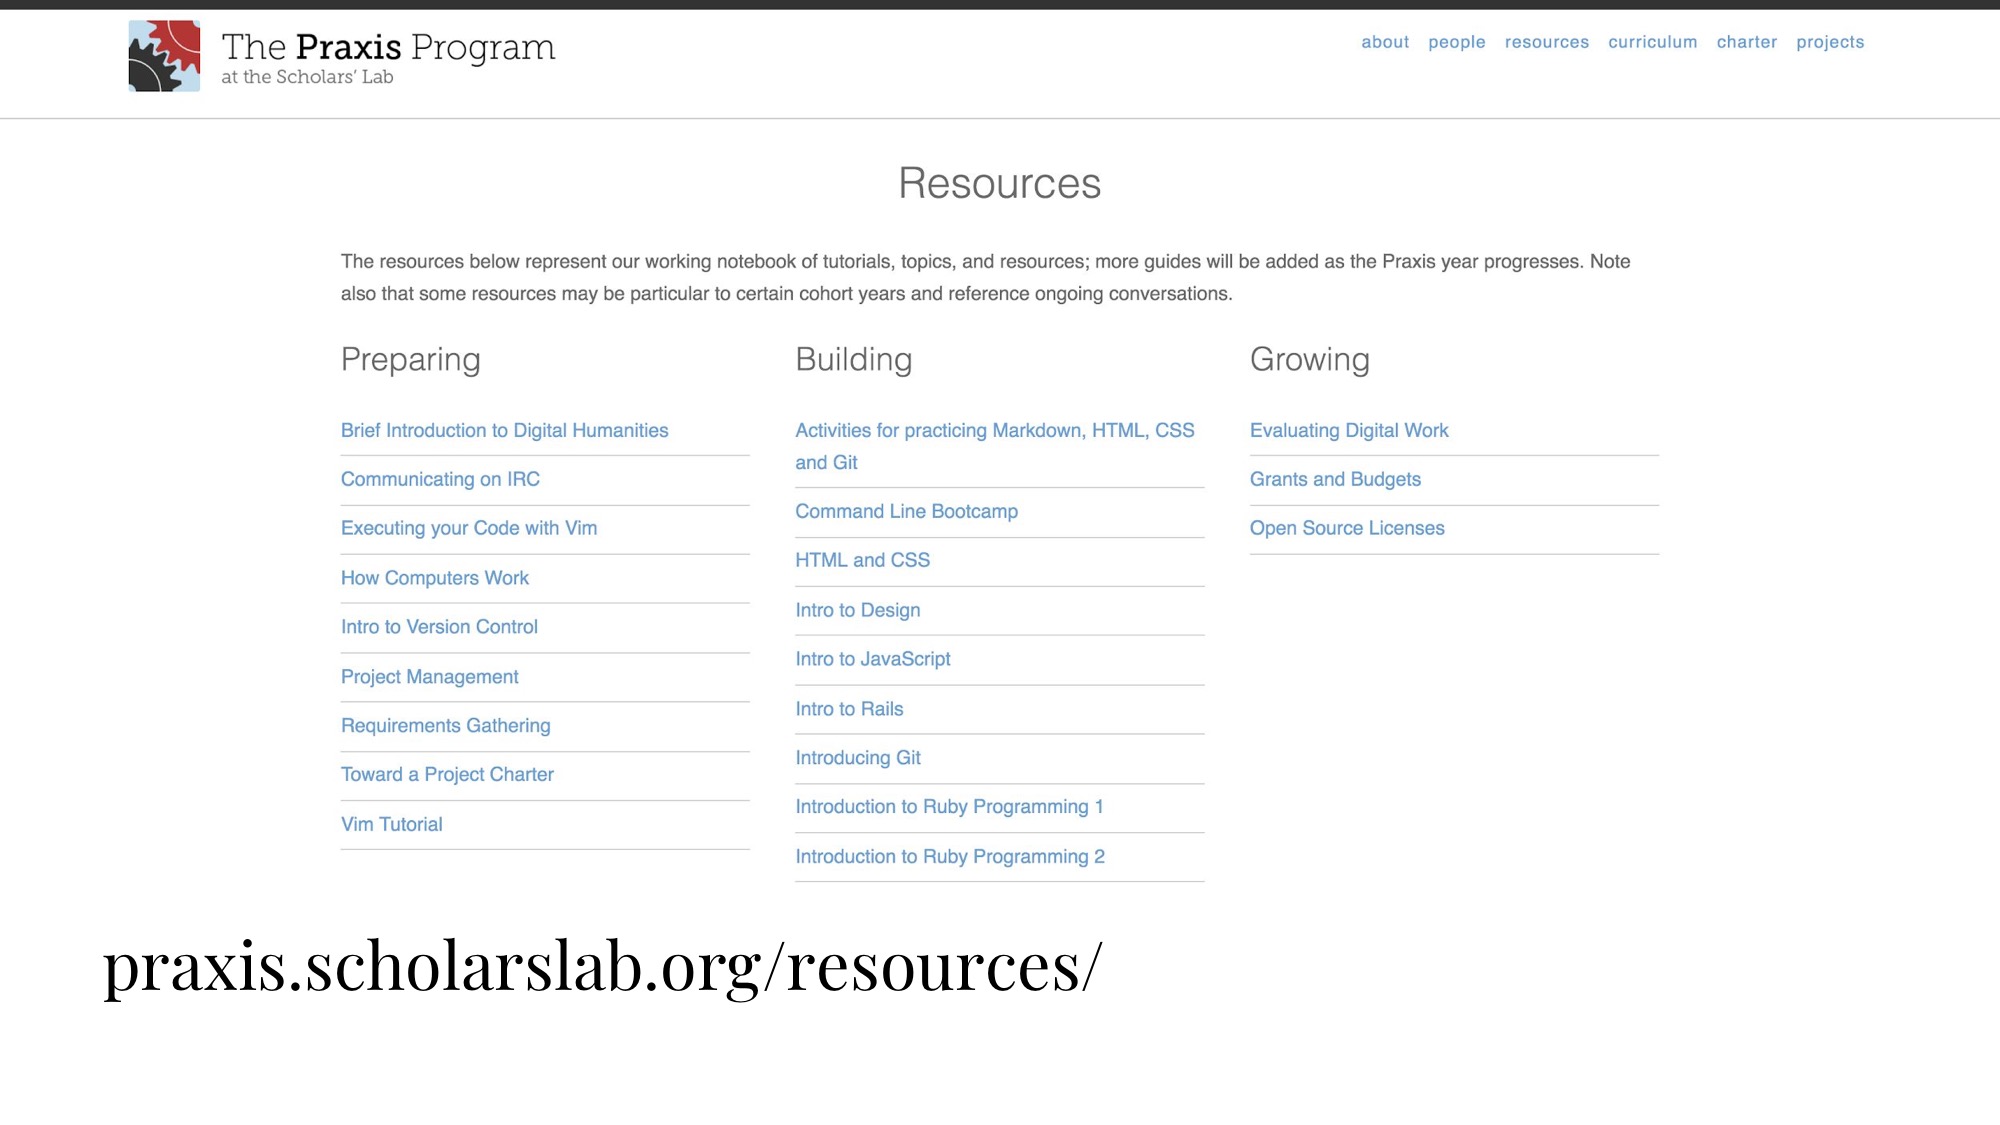 image of Praxis resources and curriculum published online